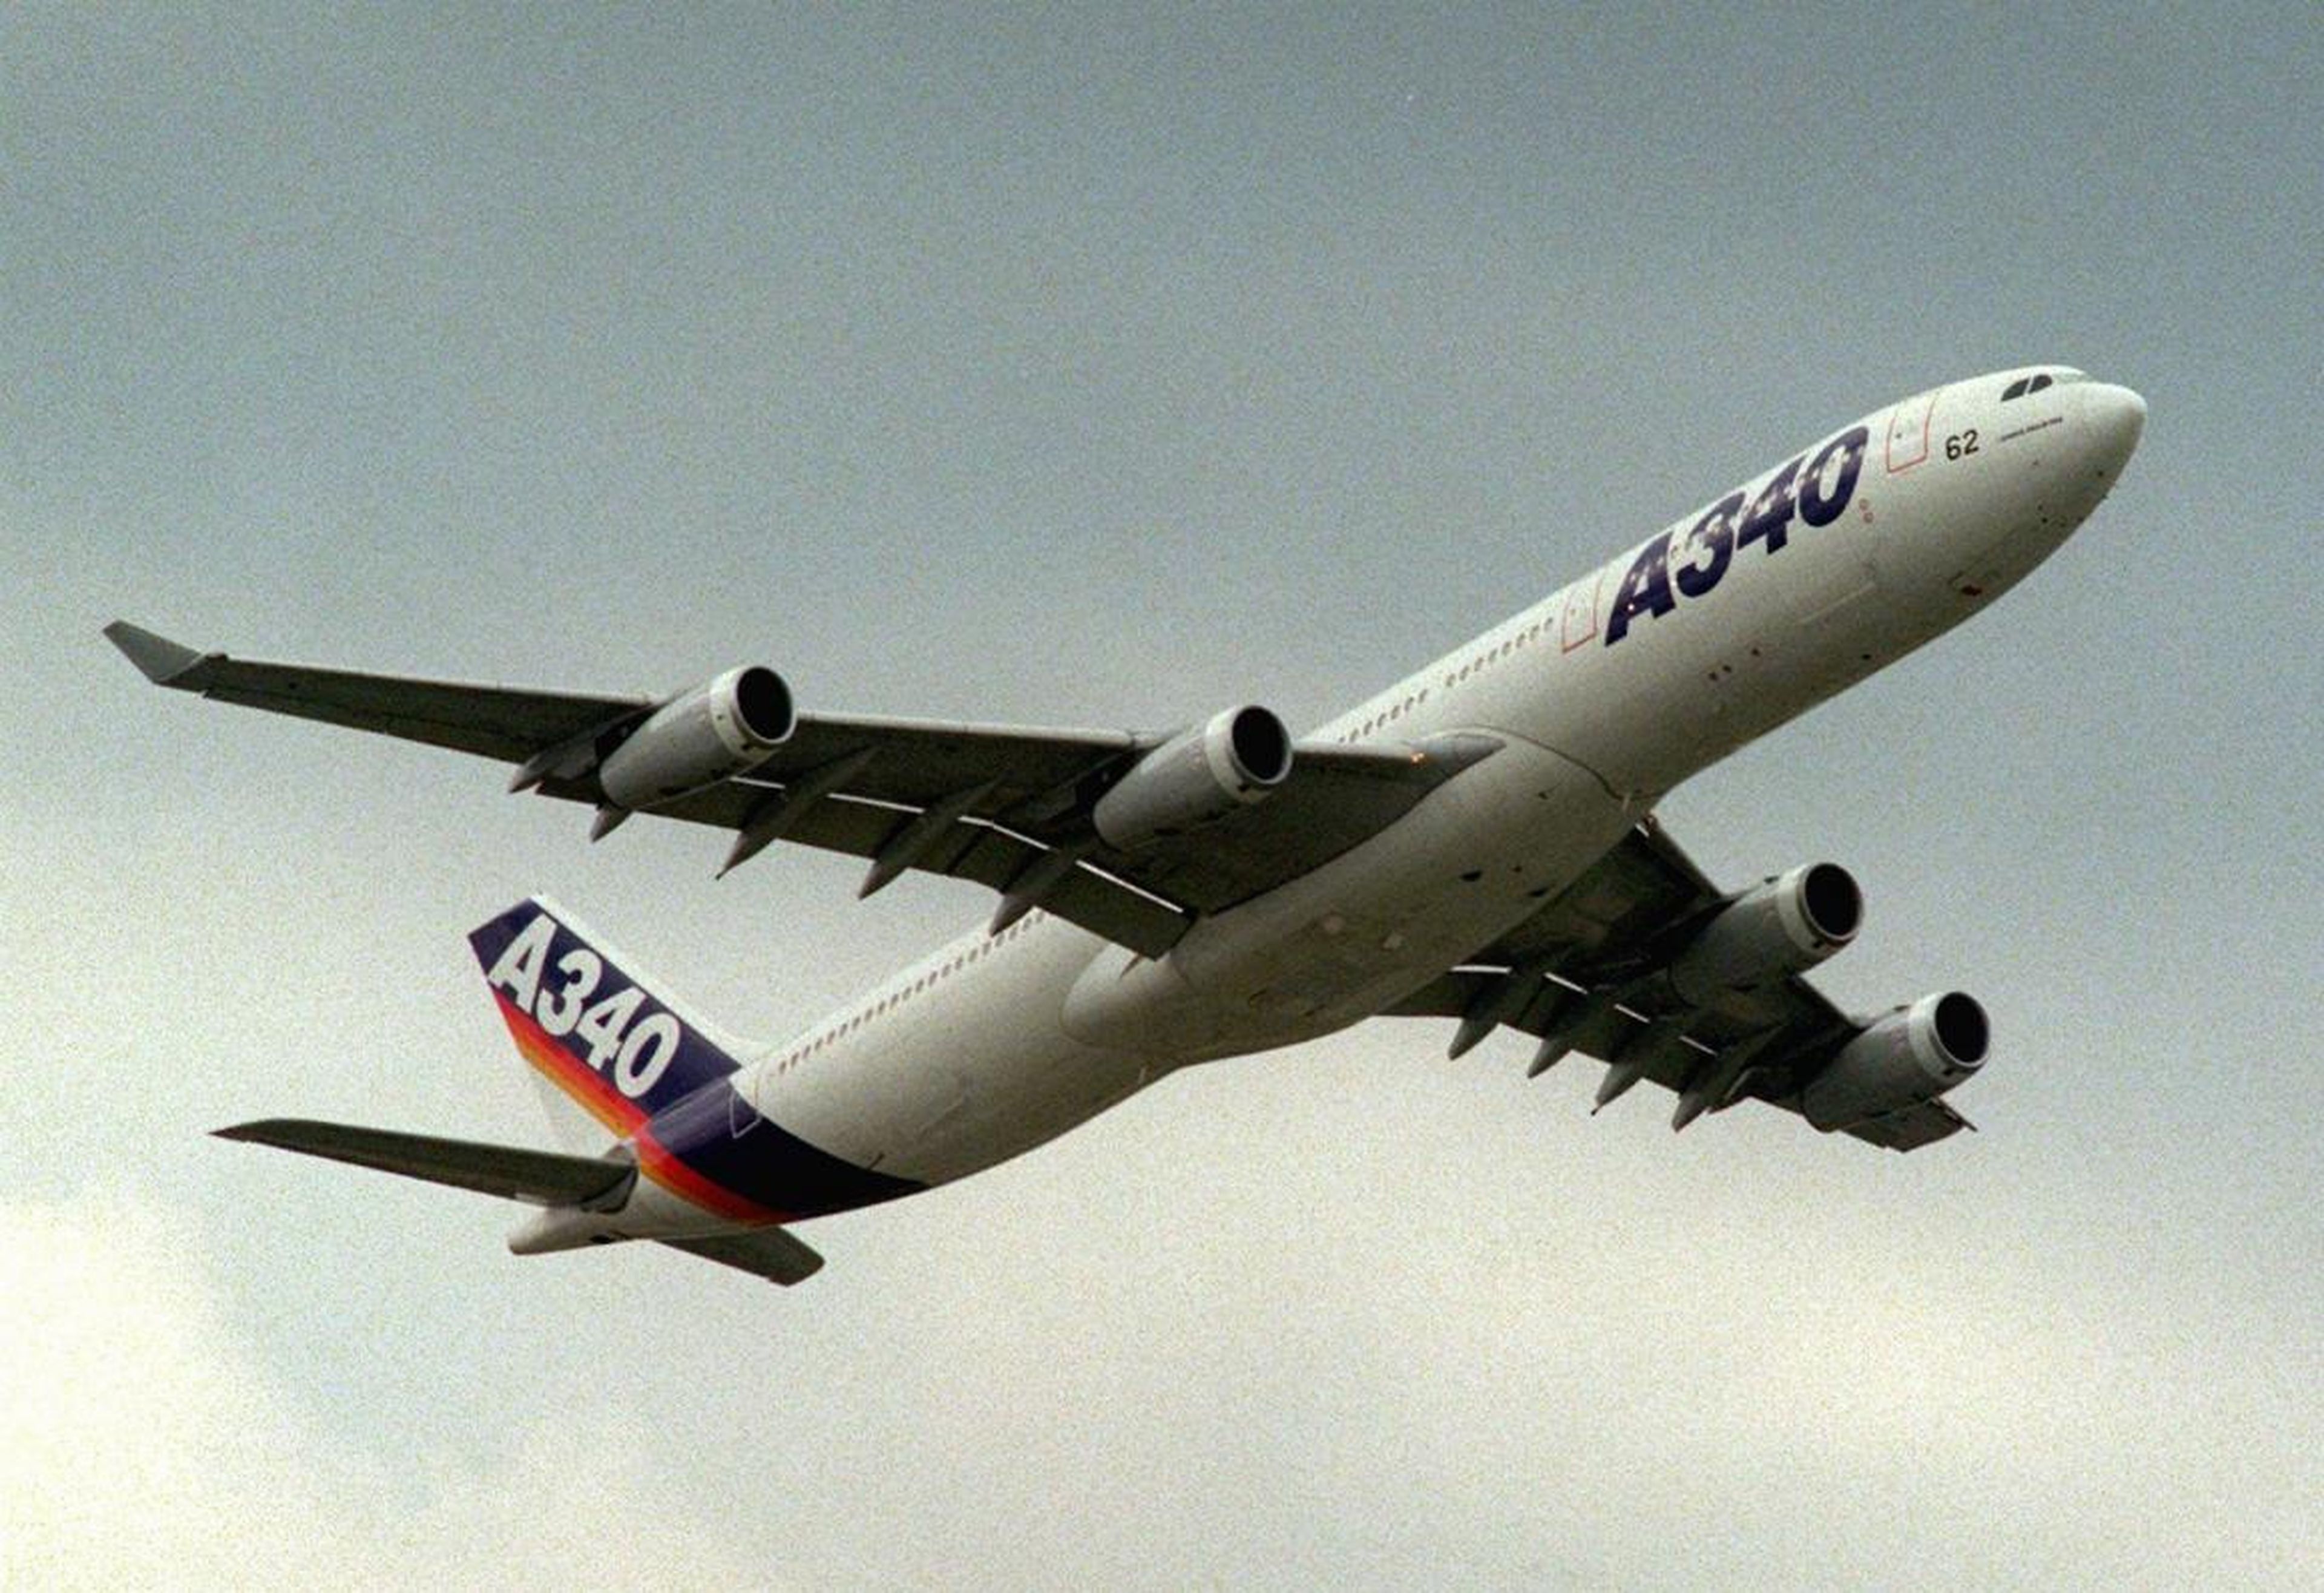 ... and A340 family wide-body jets. The two jets offered viable alternatives to Boeing's 767 and 777 wide-bodies. Now, Airbus has set its sights on a bigger target ...